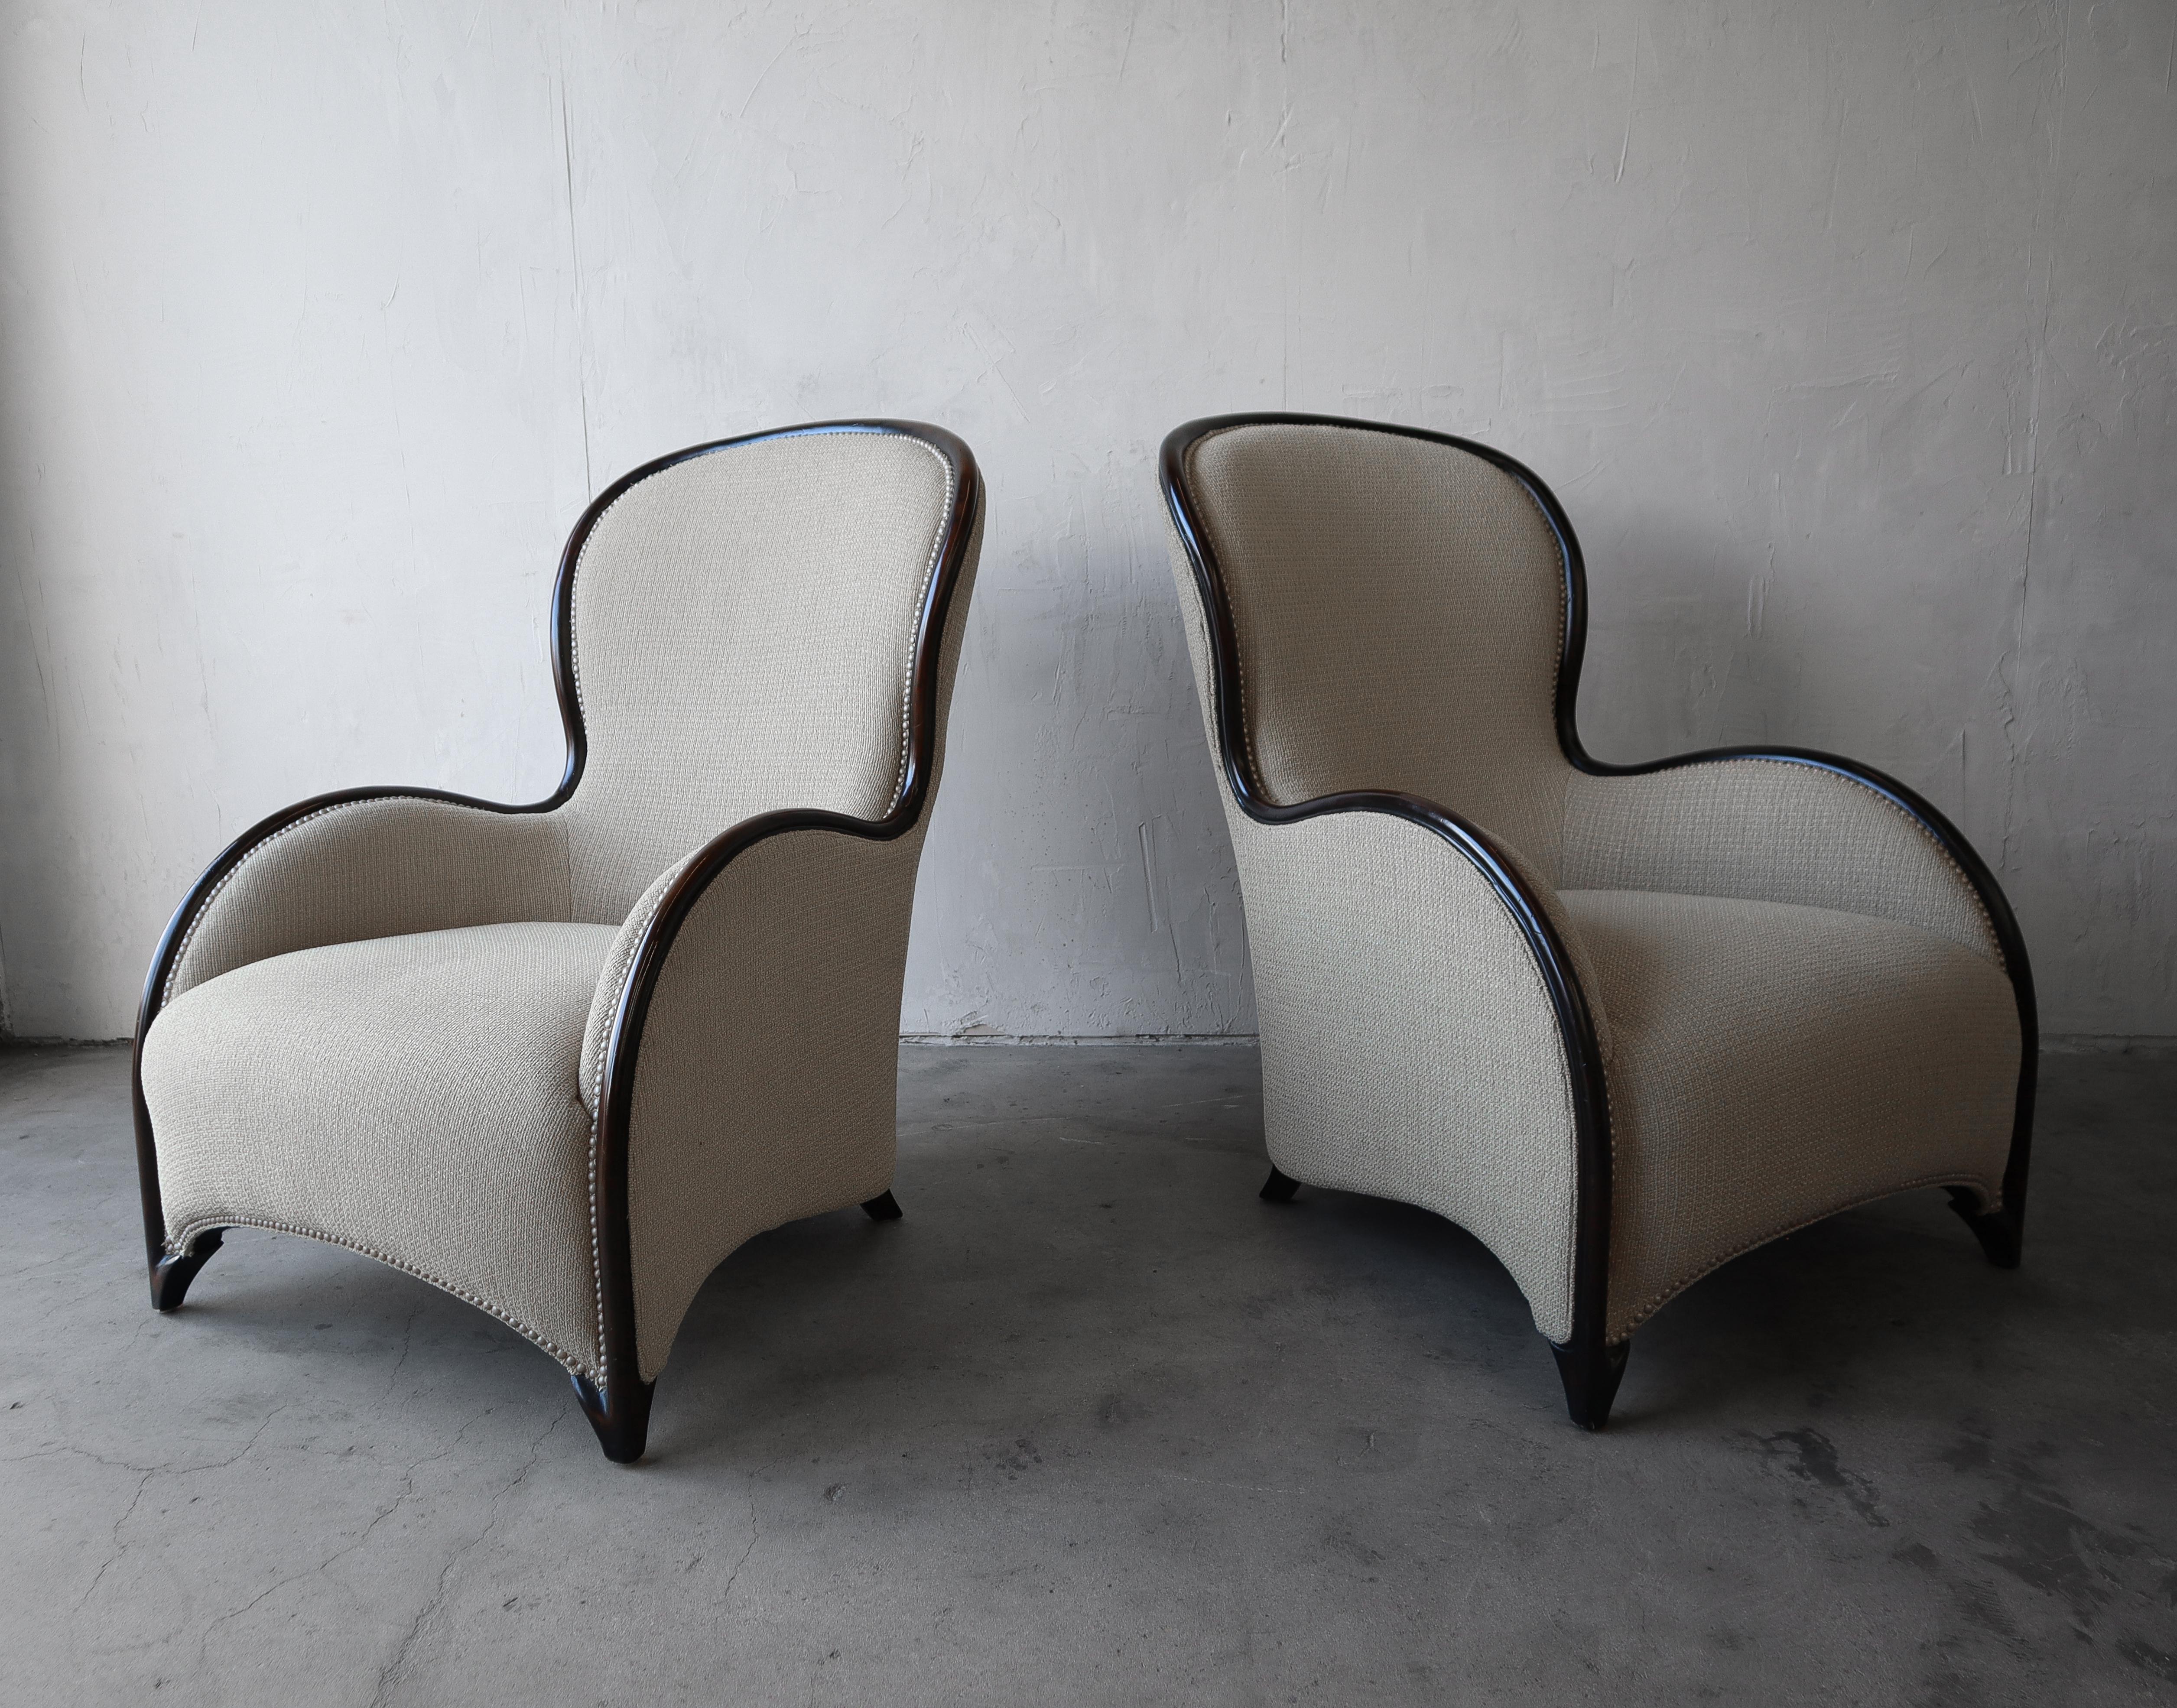 Gorgeous pair of large scale lounge chairs. These chairs have this most beautiful swooping silhouette from every angle. They will class up any space they are added to.

The chairs are dressed in a nice chunky chenille fabric that provides a nice